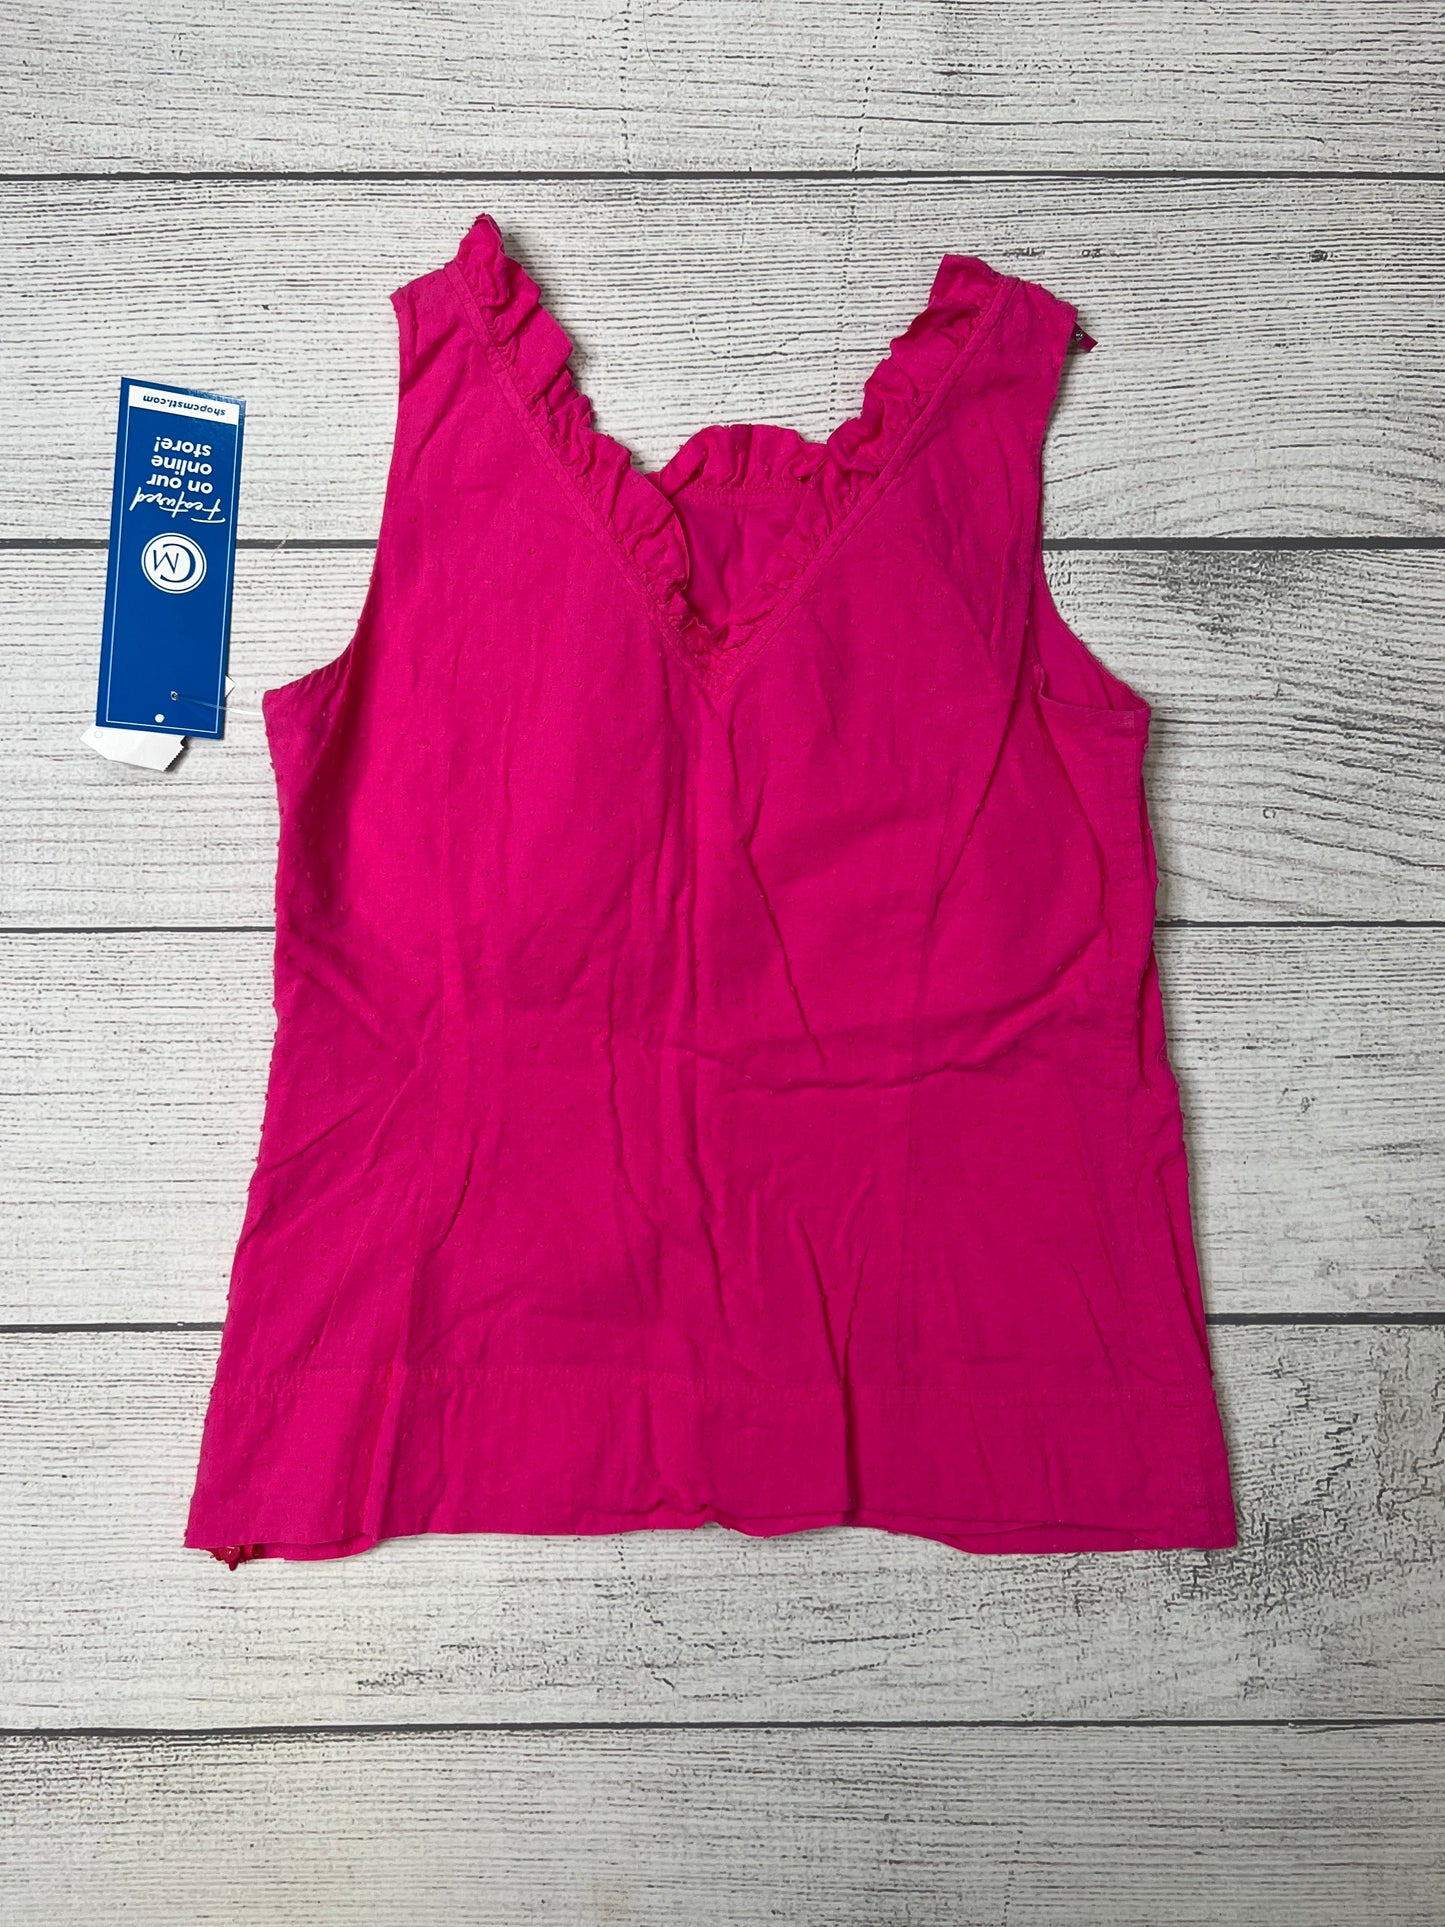 Top Sleeveless By Vineyard Vines  Size: Xs